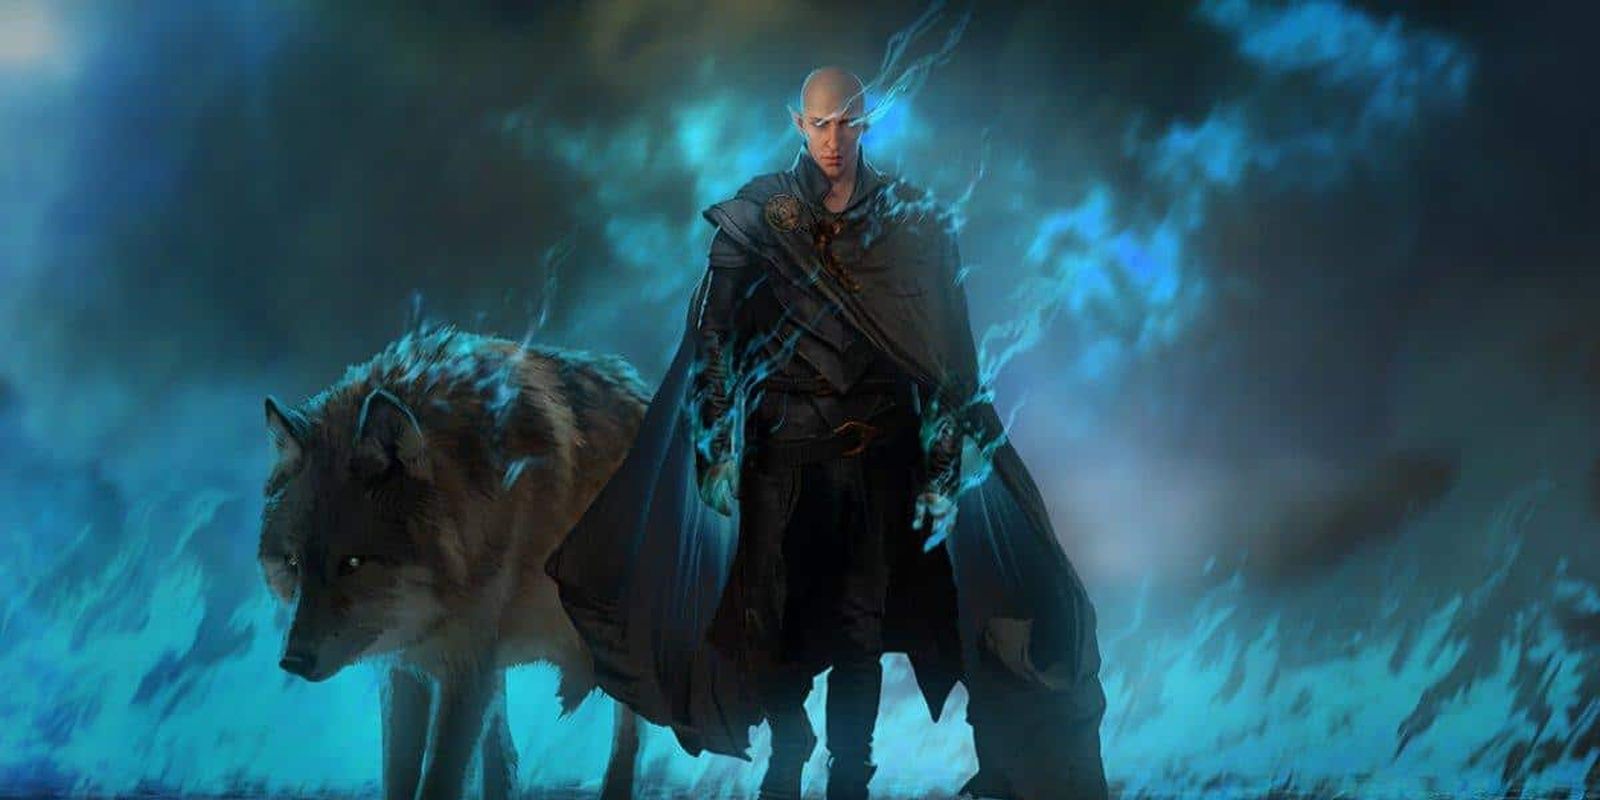 Dragon Age Dreadwolf Solas with wolf Cropped-1